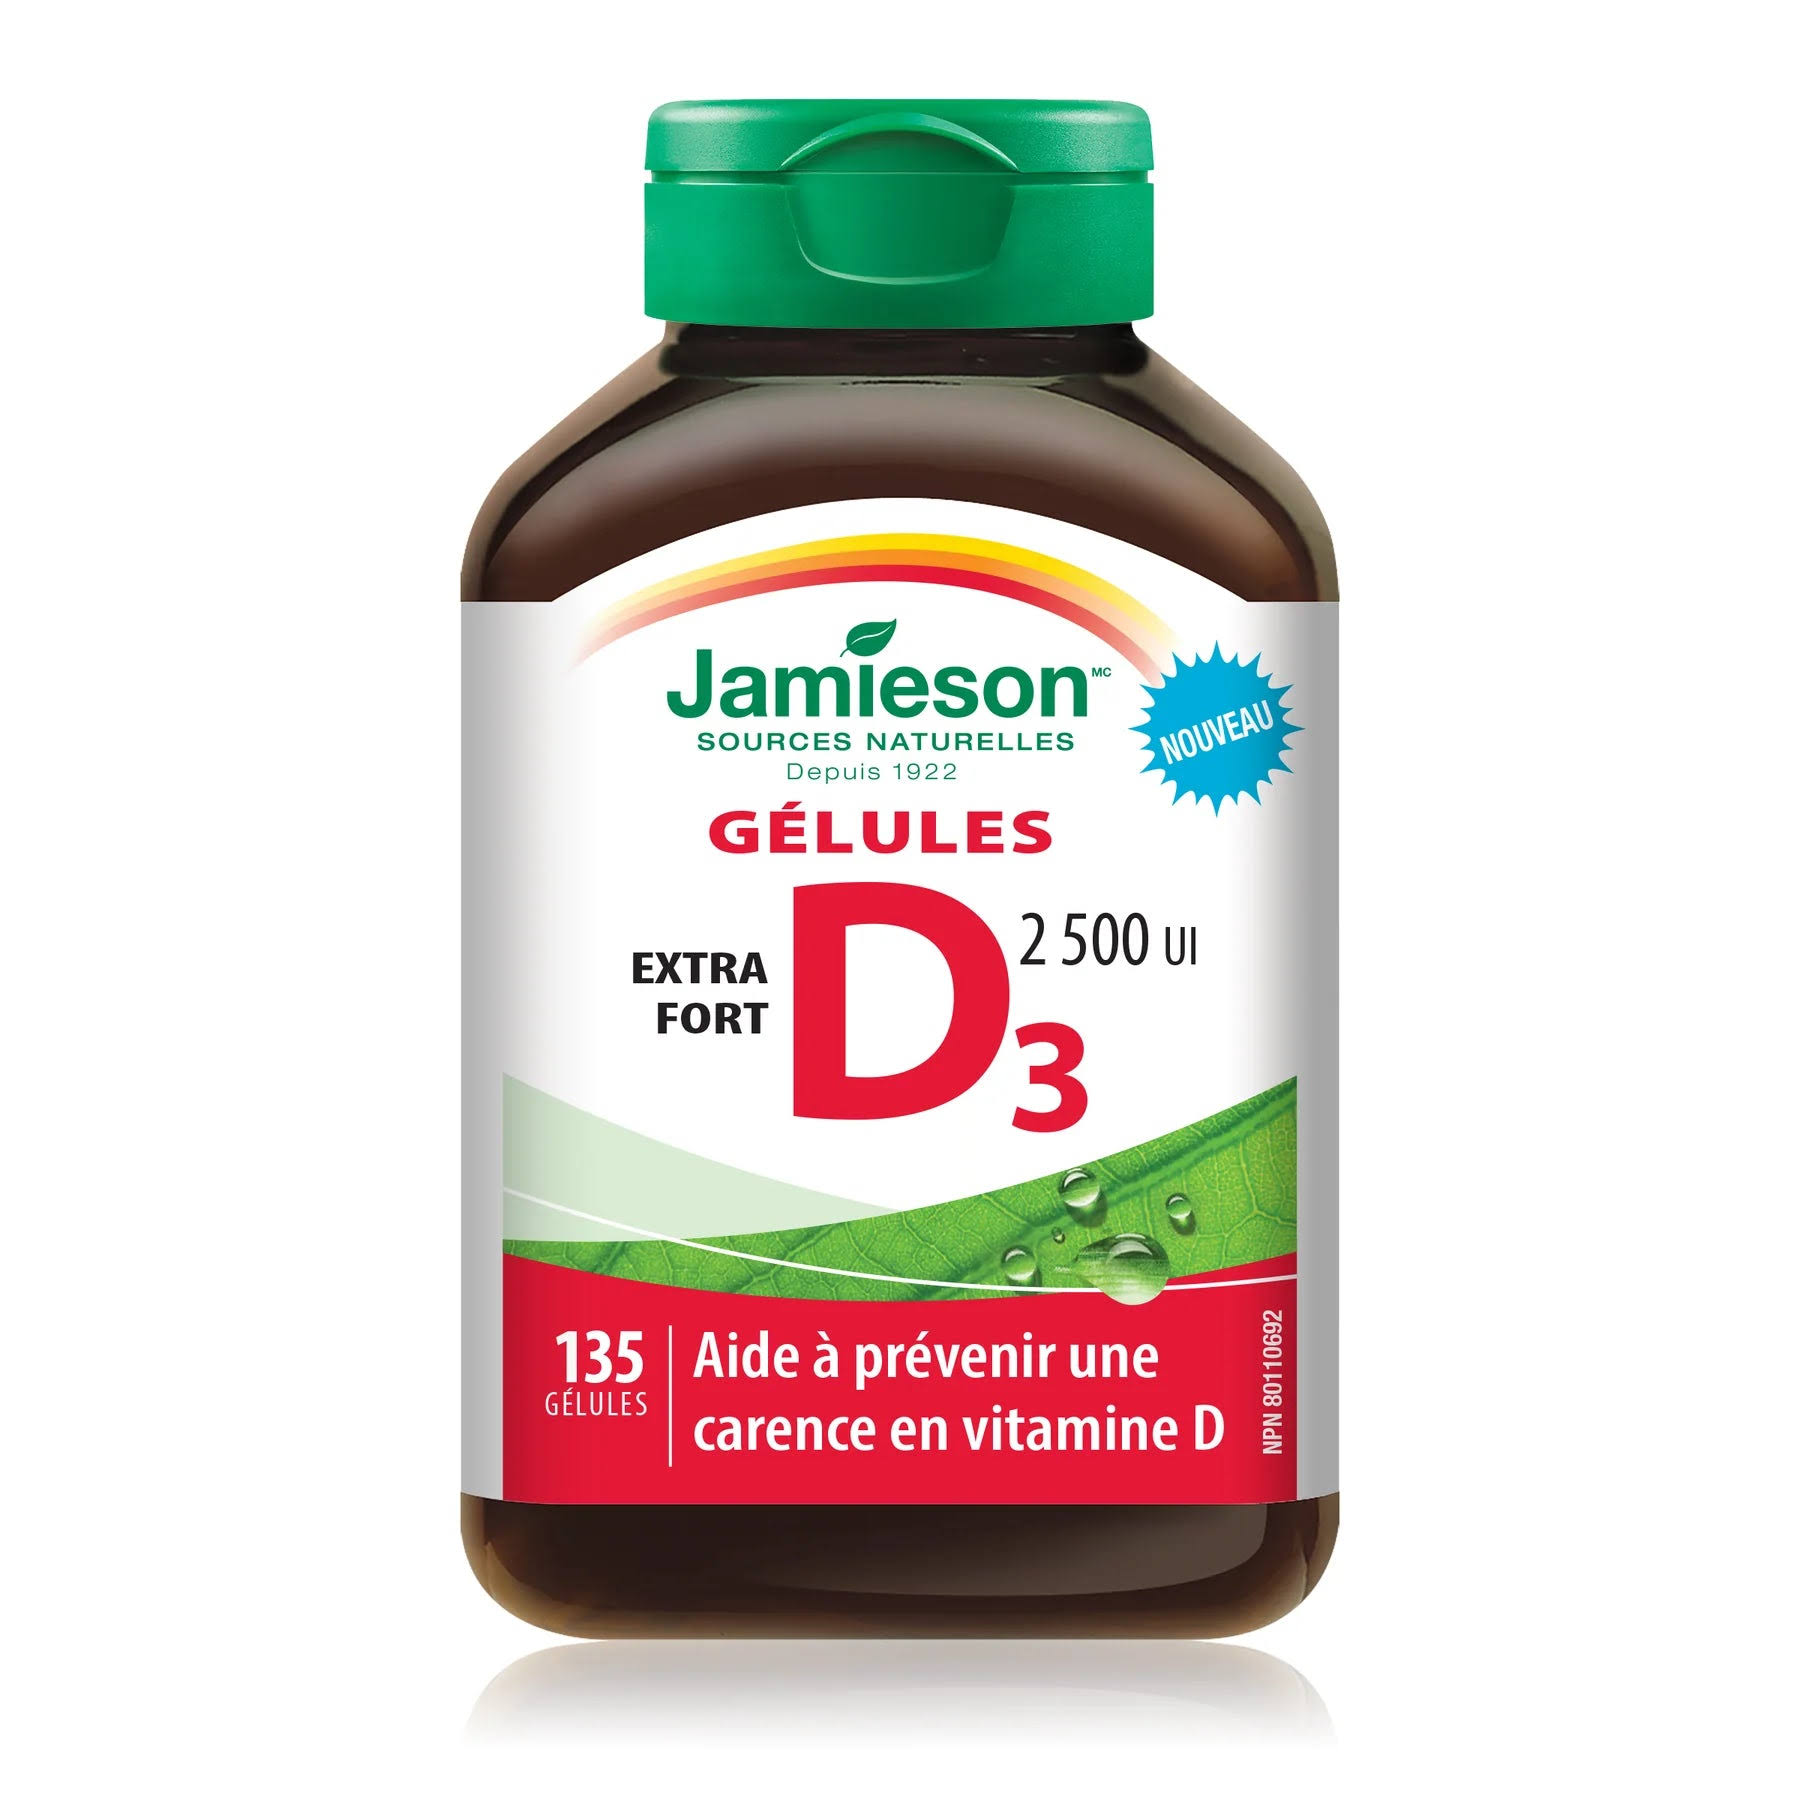 Jamieson Vitamin D3 Extra Strenght Softgels